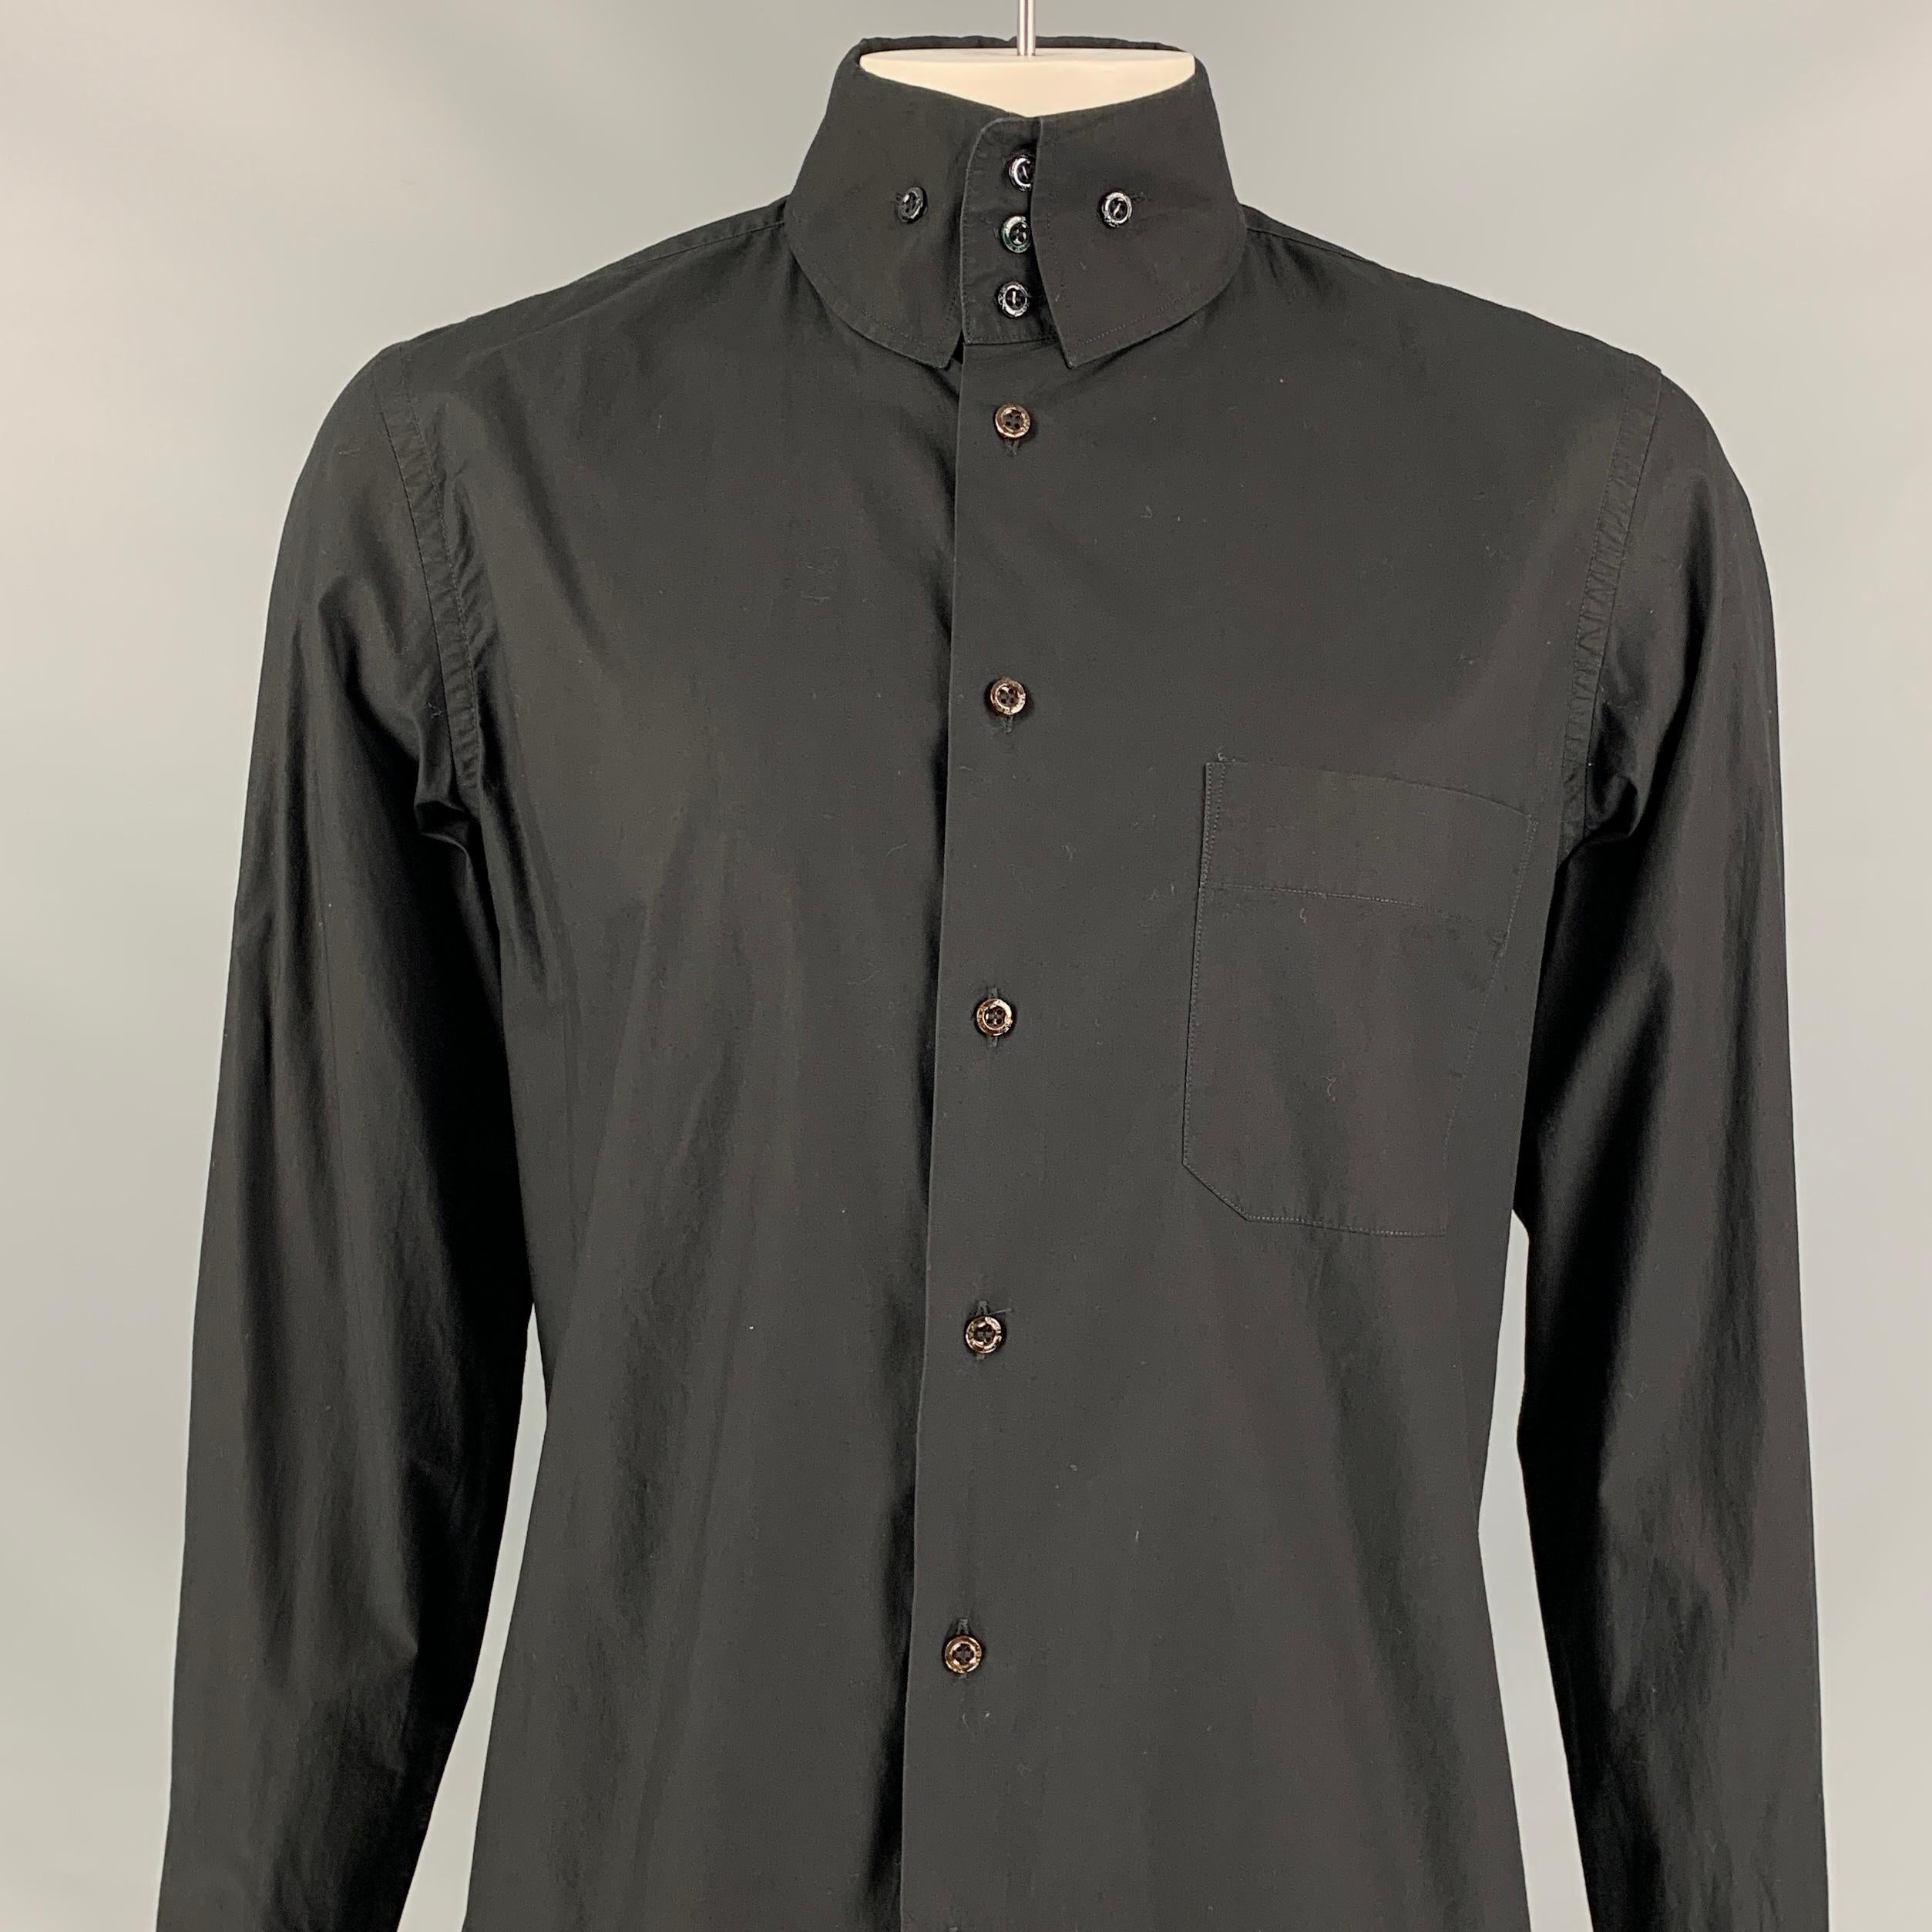 VIVIENNE WESTWOOD MAN long sleeve shirt comes in a black cotton featuring a wide buttoned collar, patch pocket, embroidered logo detail, and a button up closure. Made in Italy. 

Very Good Pre-Owned Condition.
Marked: V

Measurements:

Shoulder: